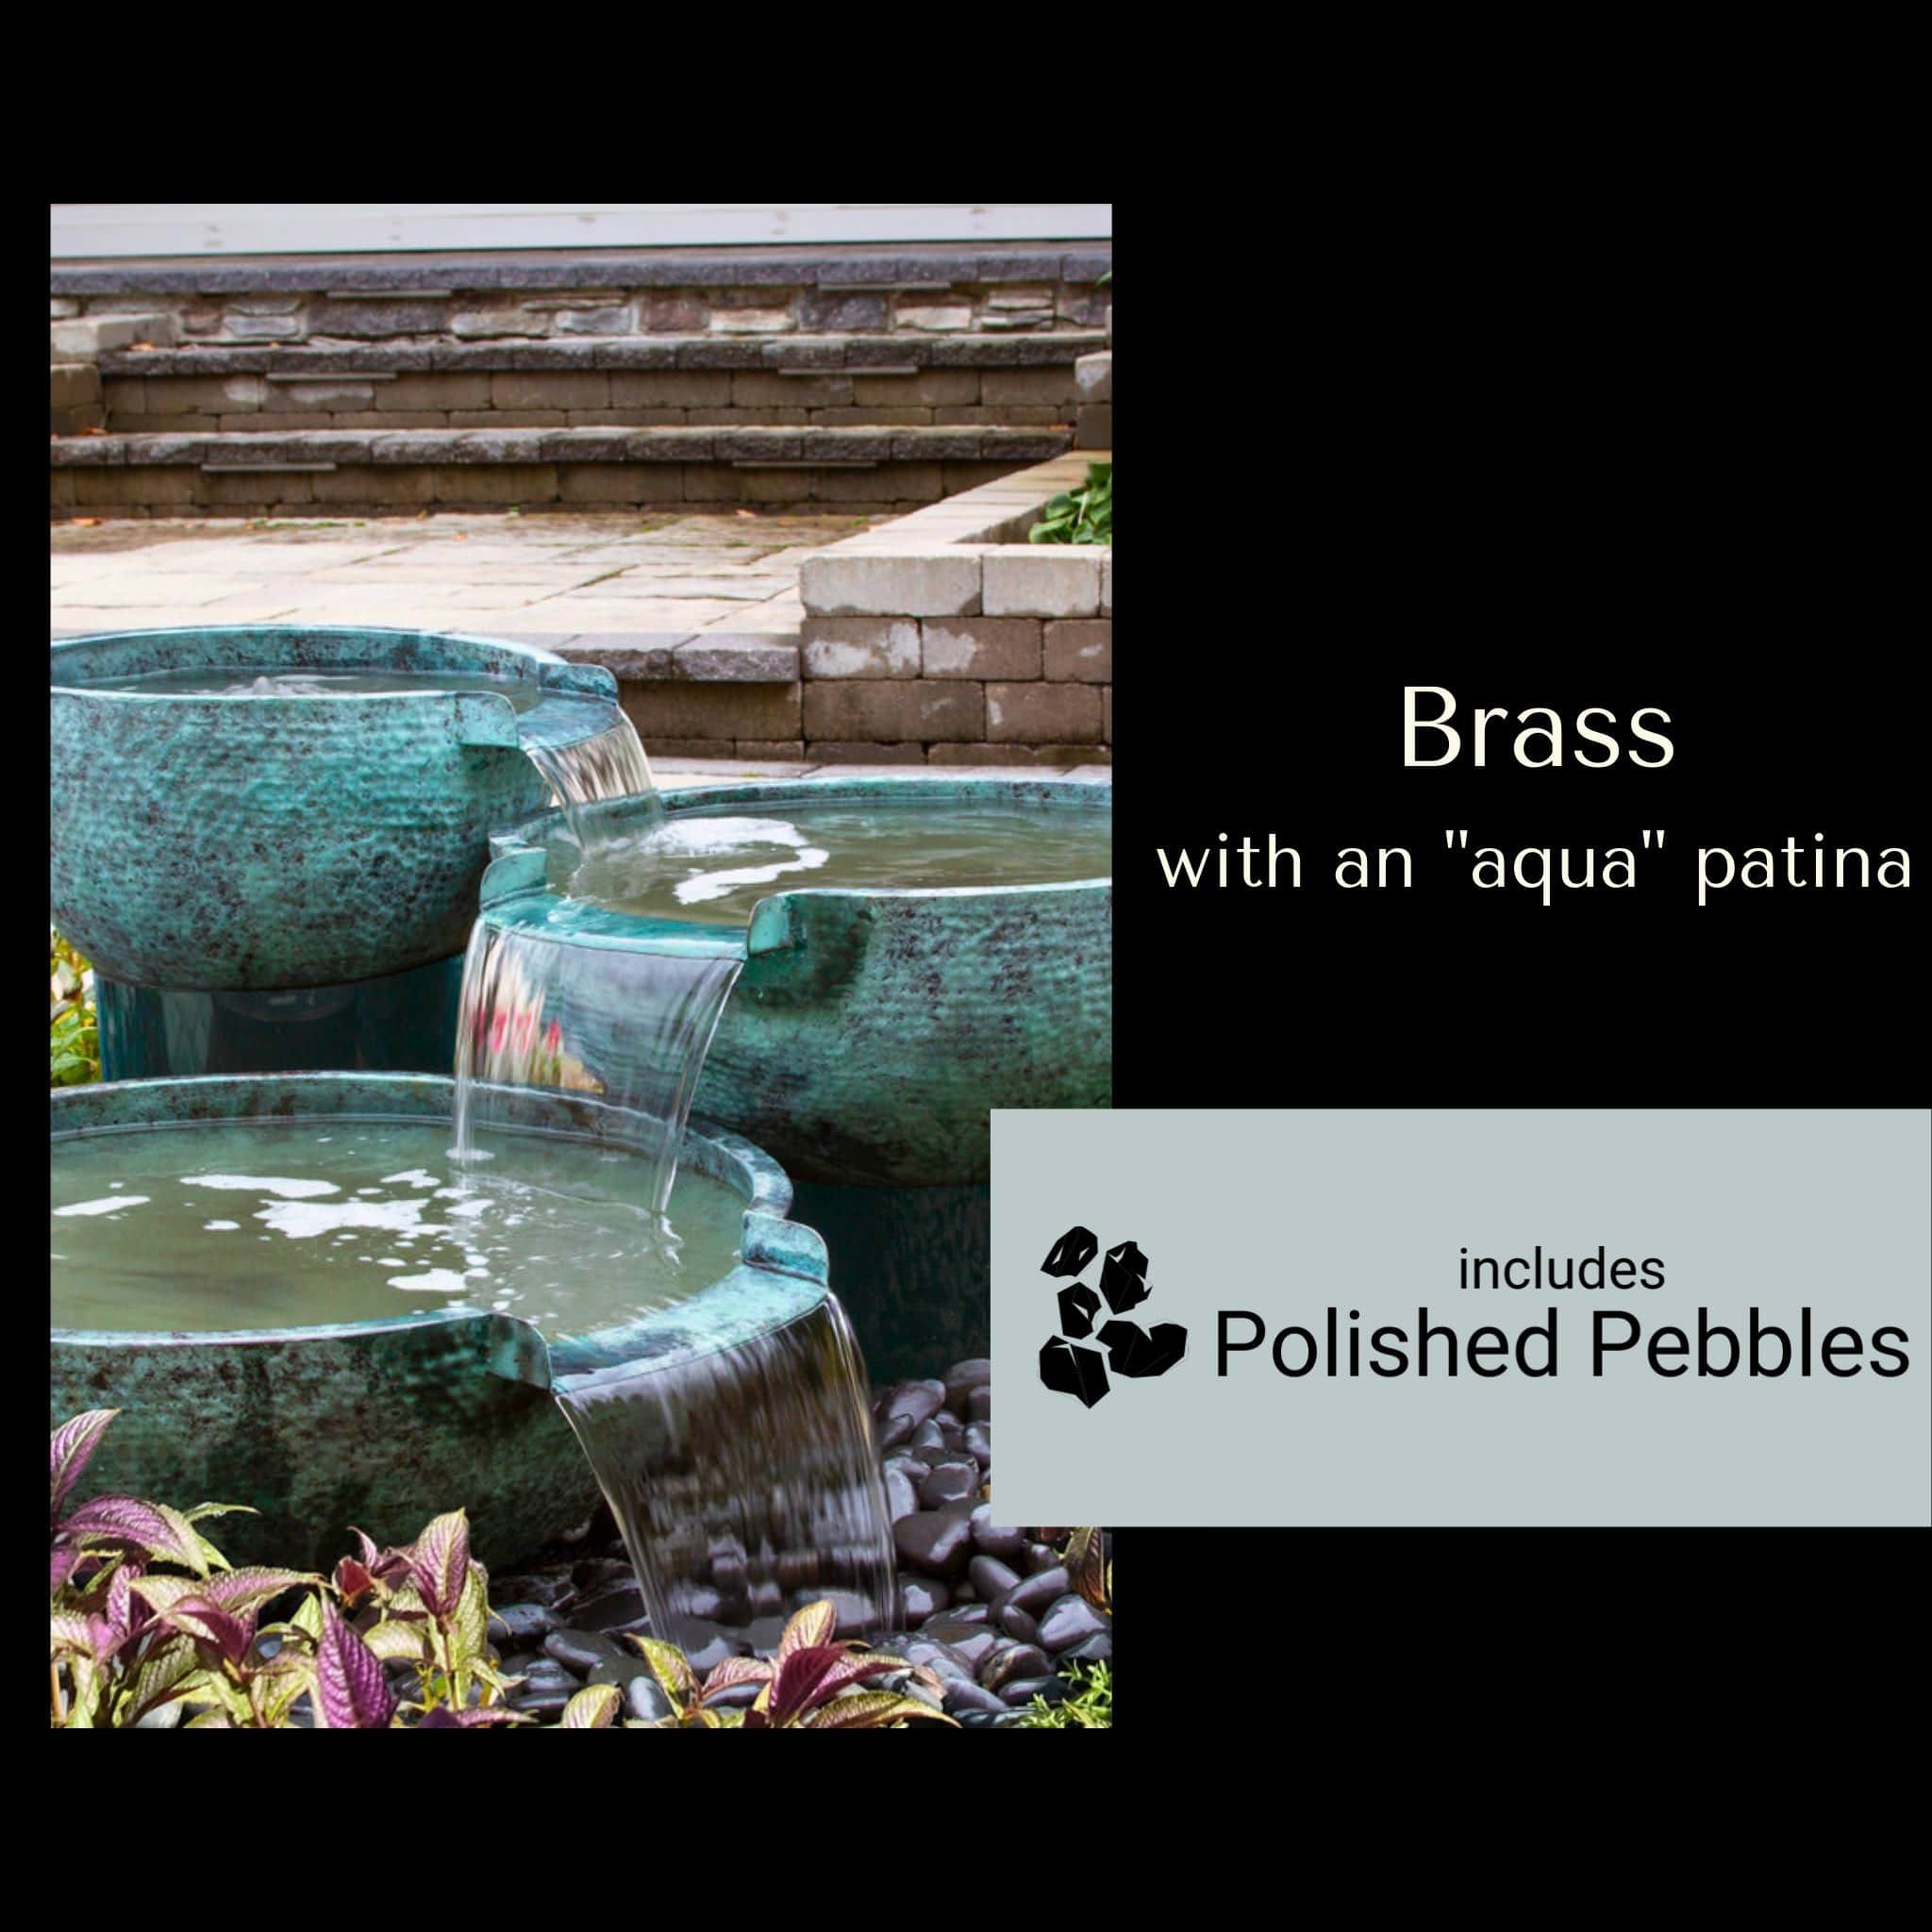 Double Spillway Brass Bowl Fountain - Complete Kit - Blue Thumb